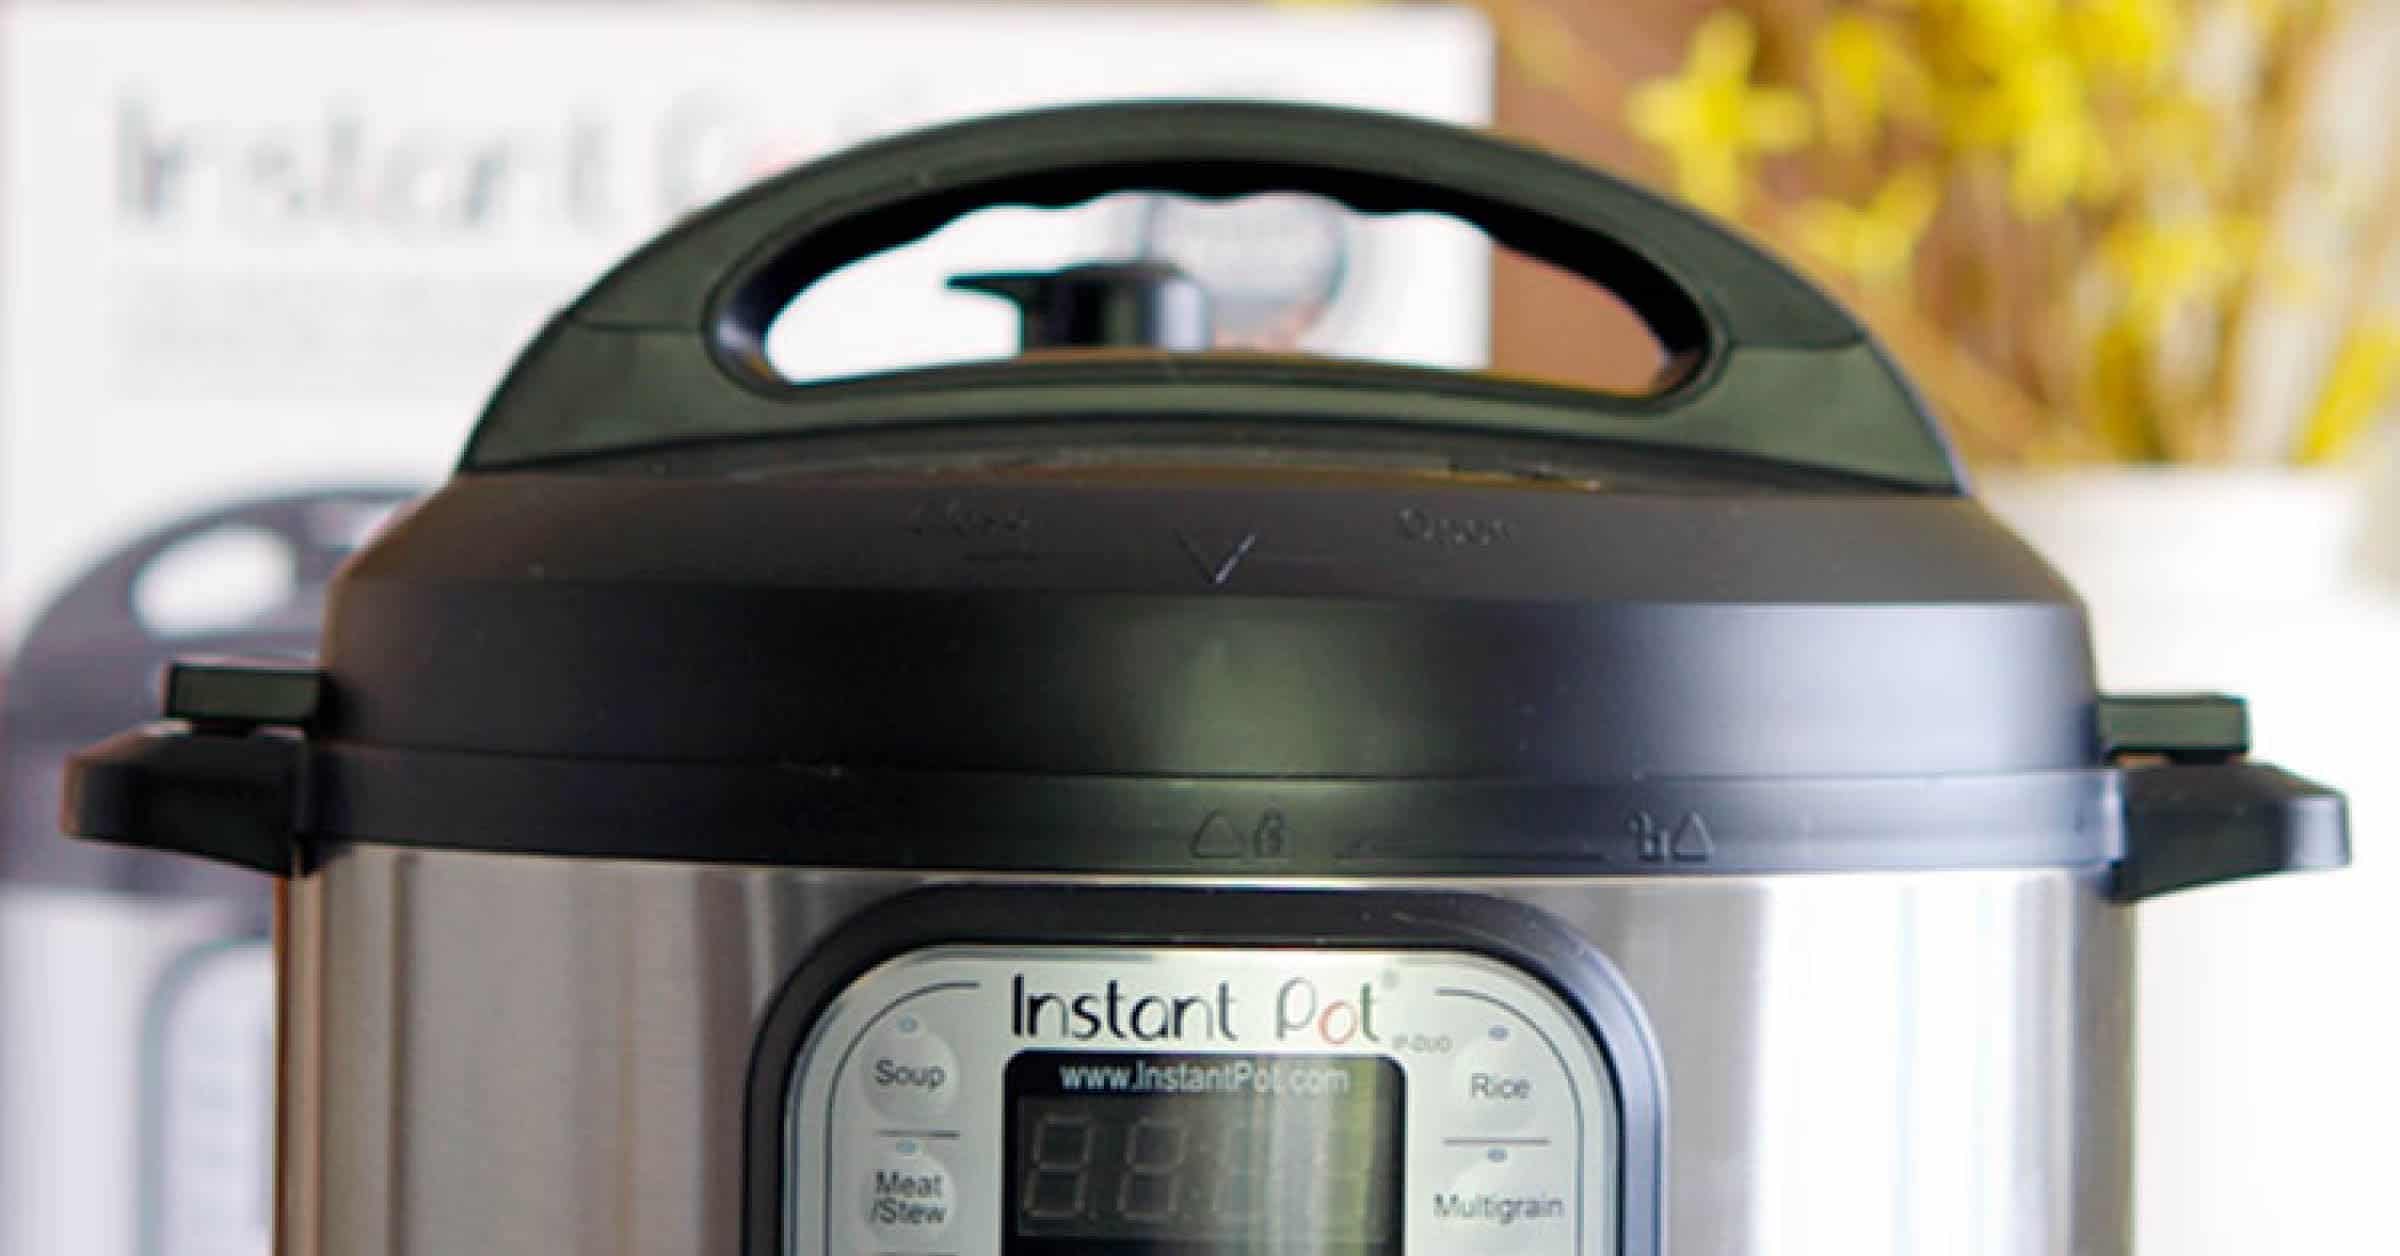 How To Use The Instant Pot - Dos & Don'ts - One Happy Housewife